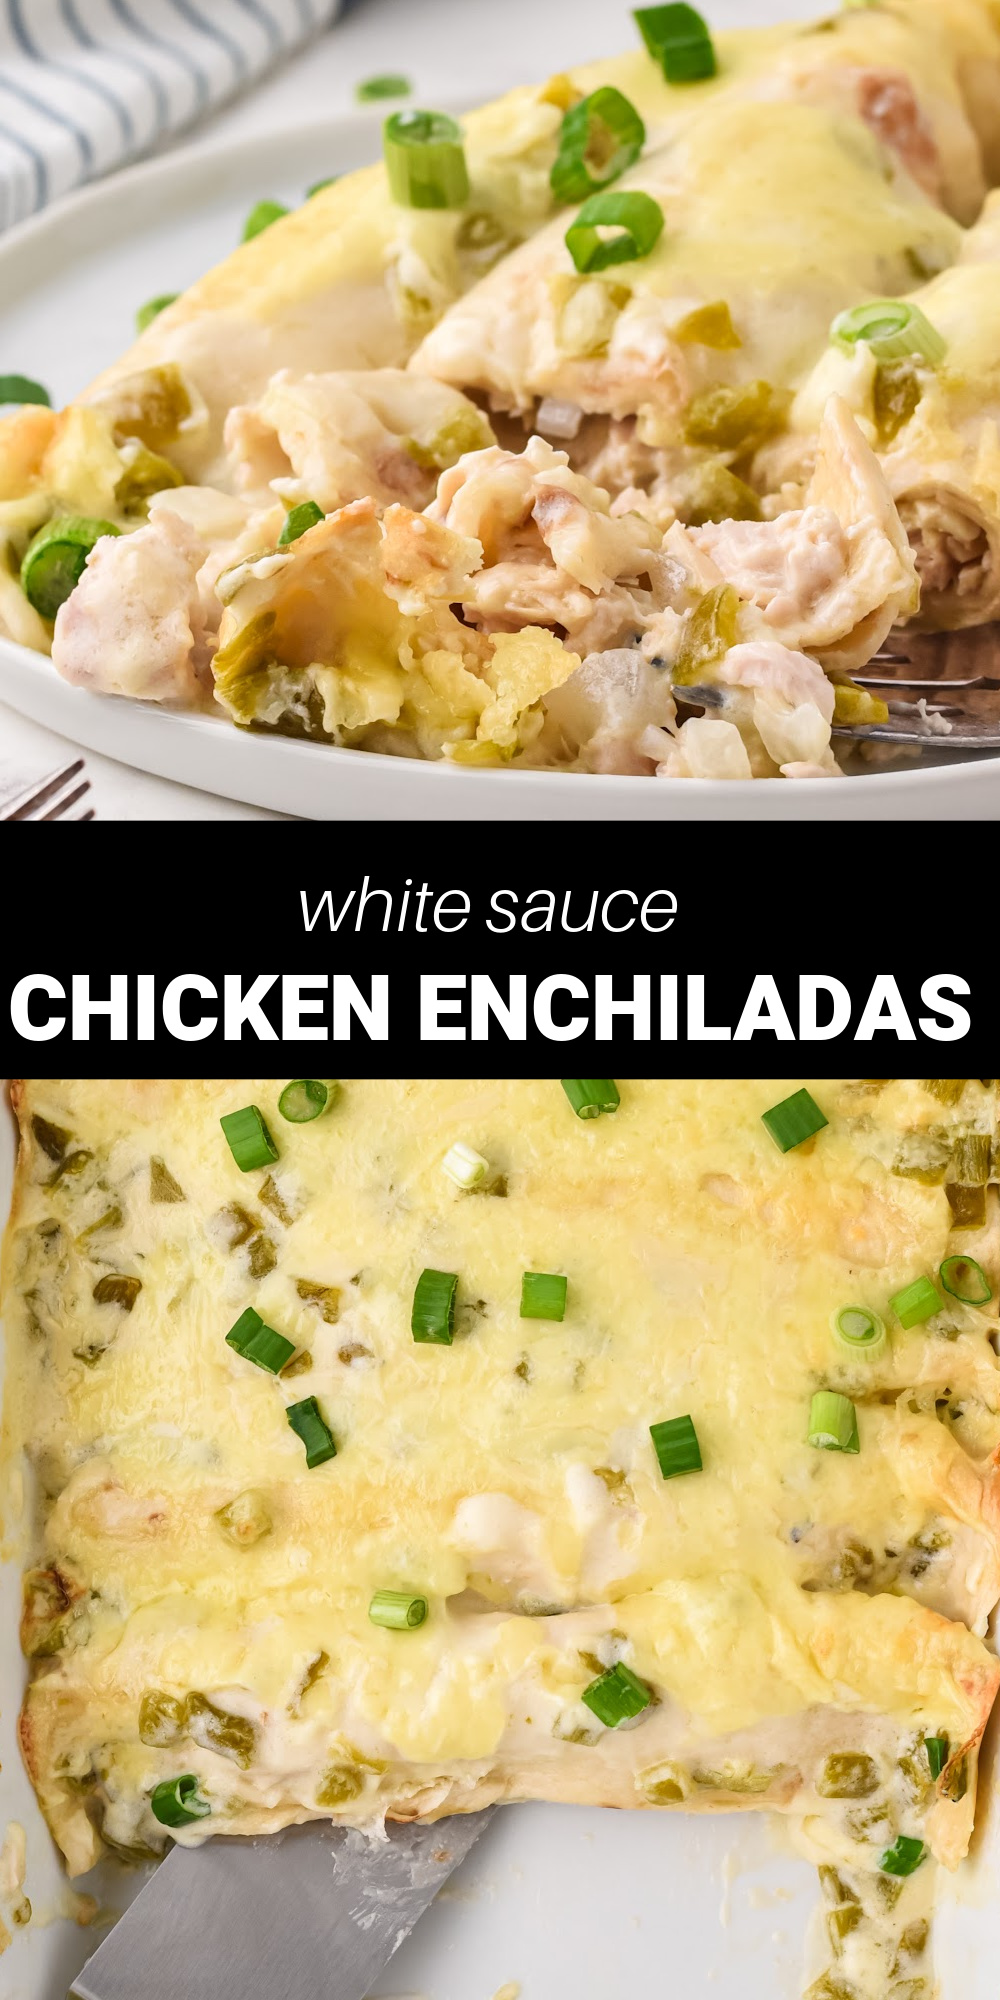 Deliciously hot and bubbly Chicken Enchiladas with White Sauce are a super flavorful, melt-in your-mouth meal that's sure to satisfy all your Mexican cravings.